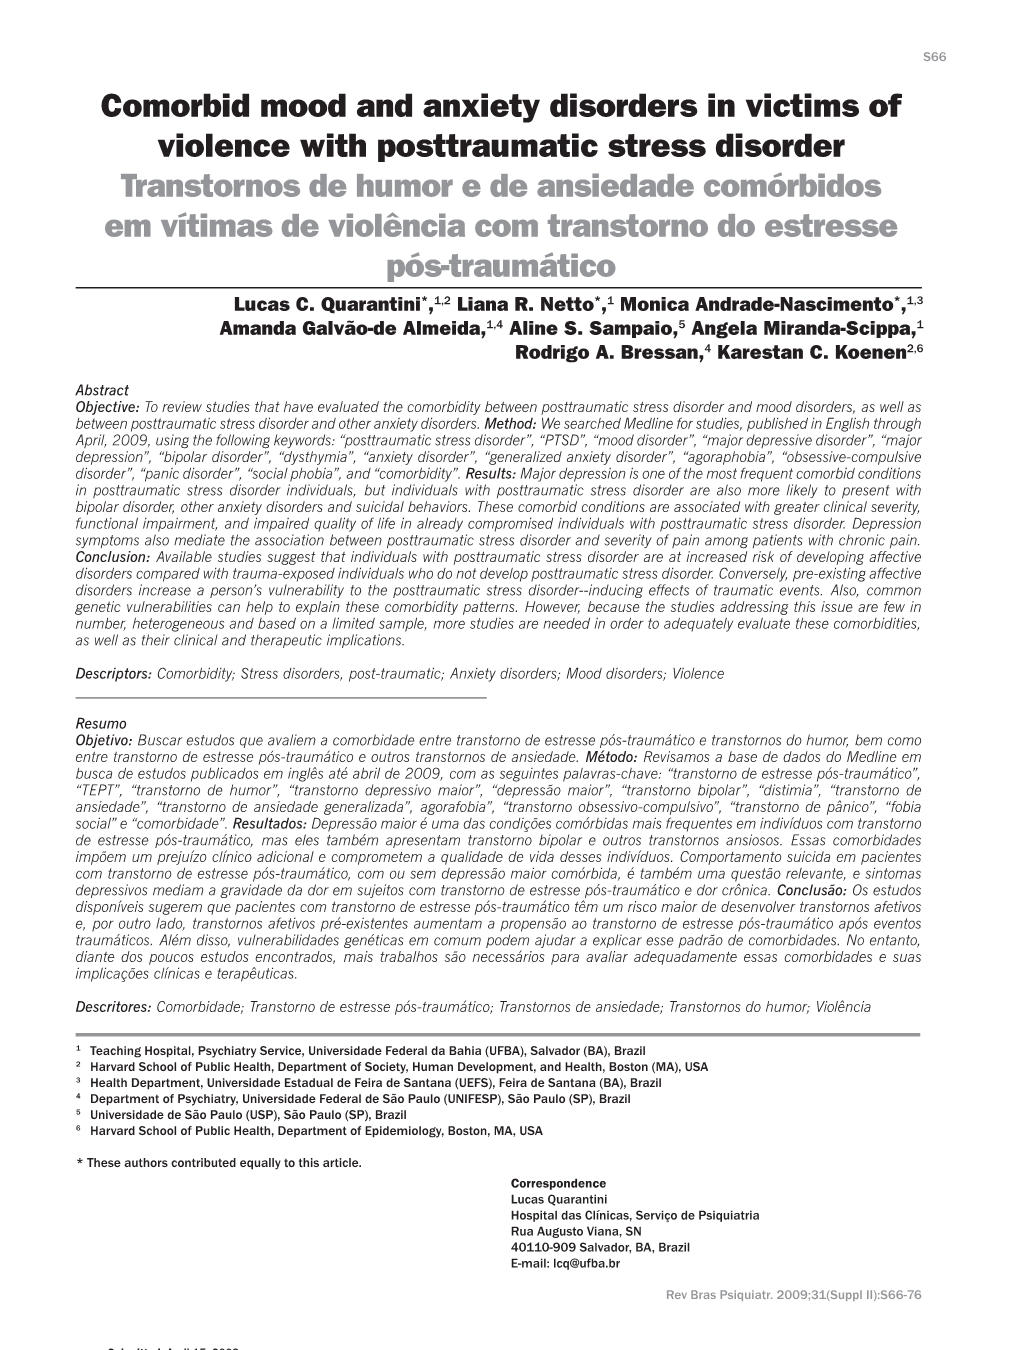 Comorbid Mood and Anxiety Disorders in Victims of Violence With